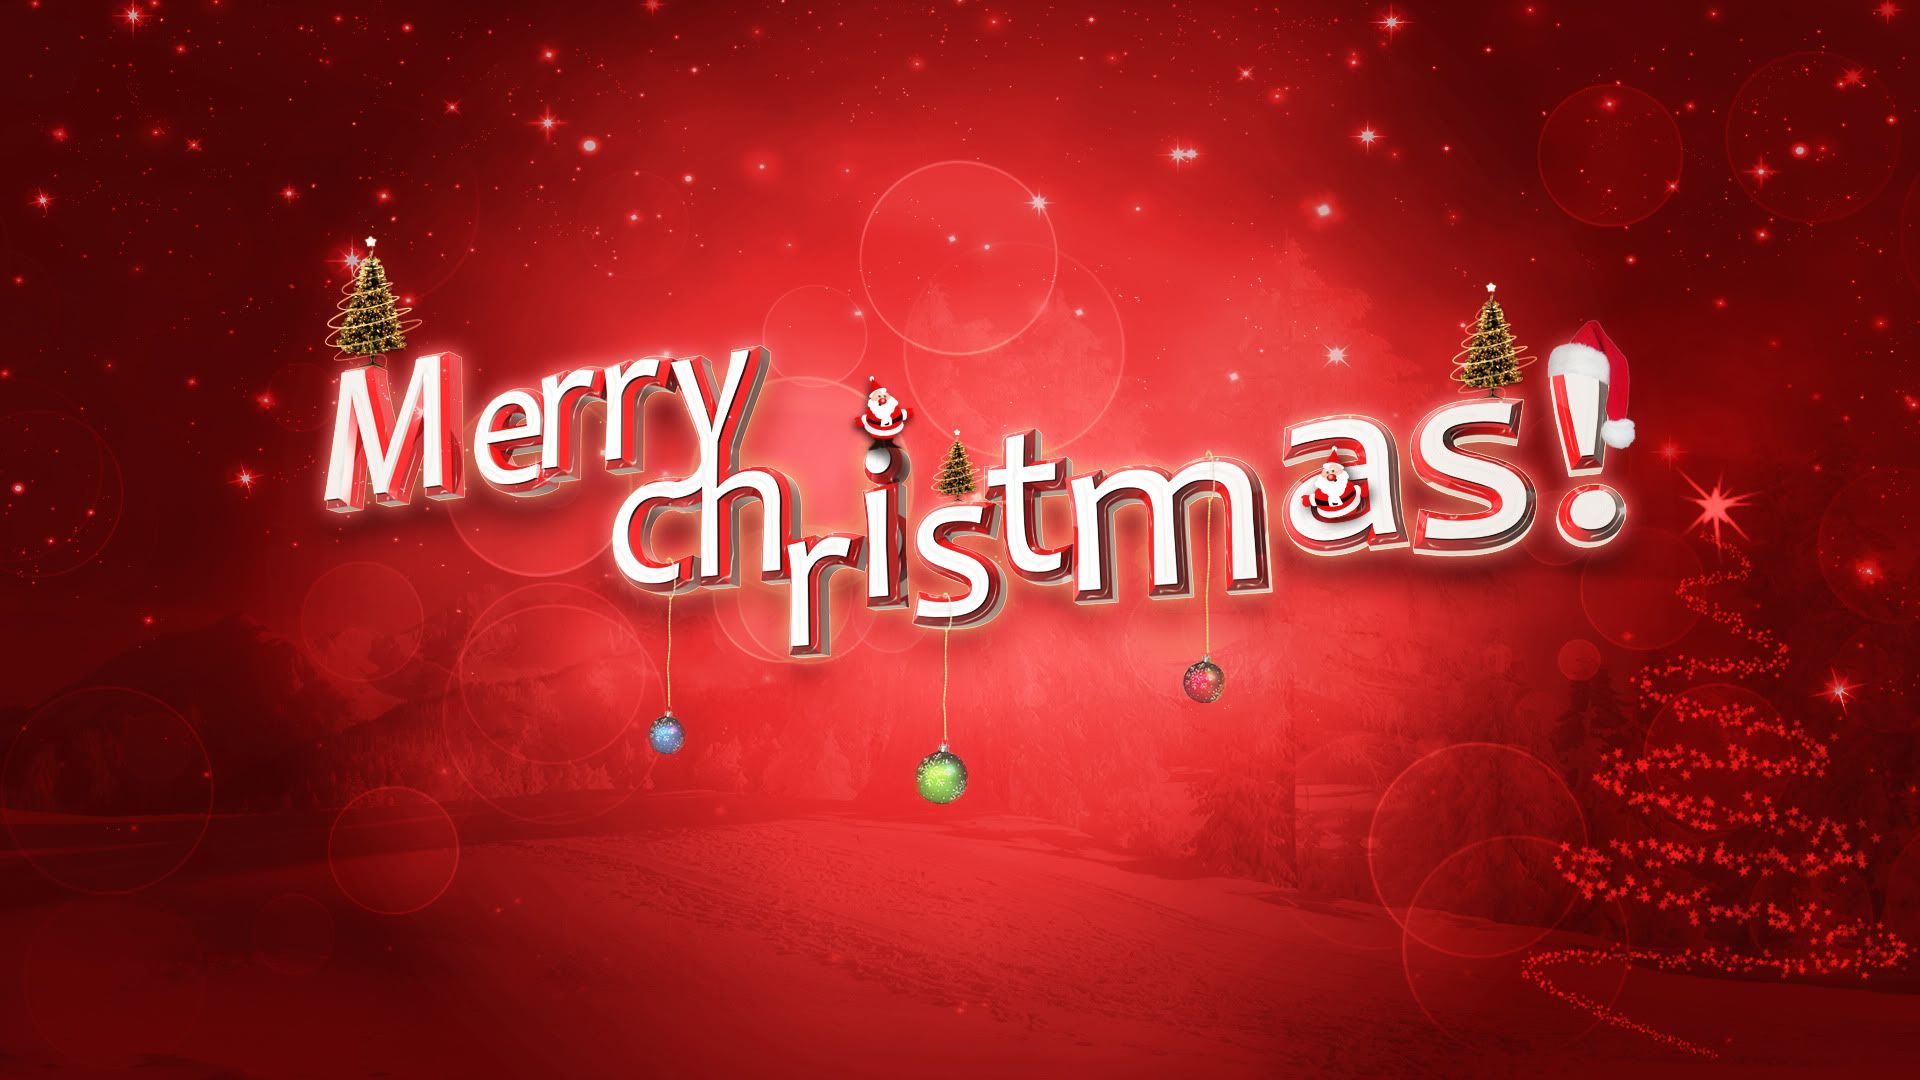 Download Happy Christmas Images - Merry Christmas Wallpaper Red - 1920x1080  Wallpaper 